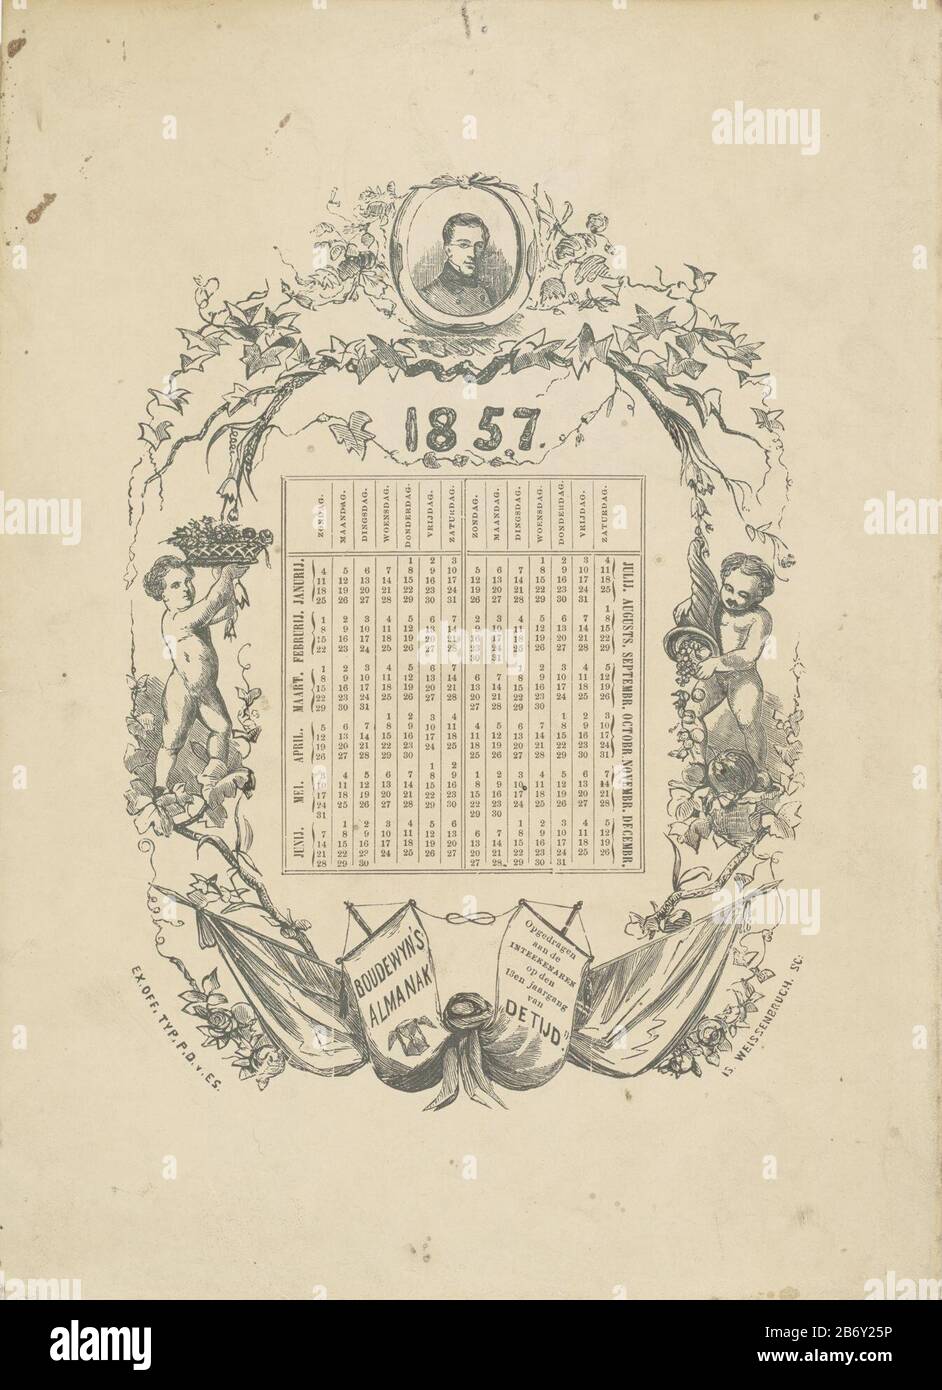 Kalender voor 1857 in een geornamenteerde omlijsting the twelve months of year, the days of the week. Top center a portrait of a man glasses. Thereabout flowers, plants and some